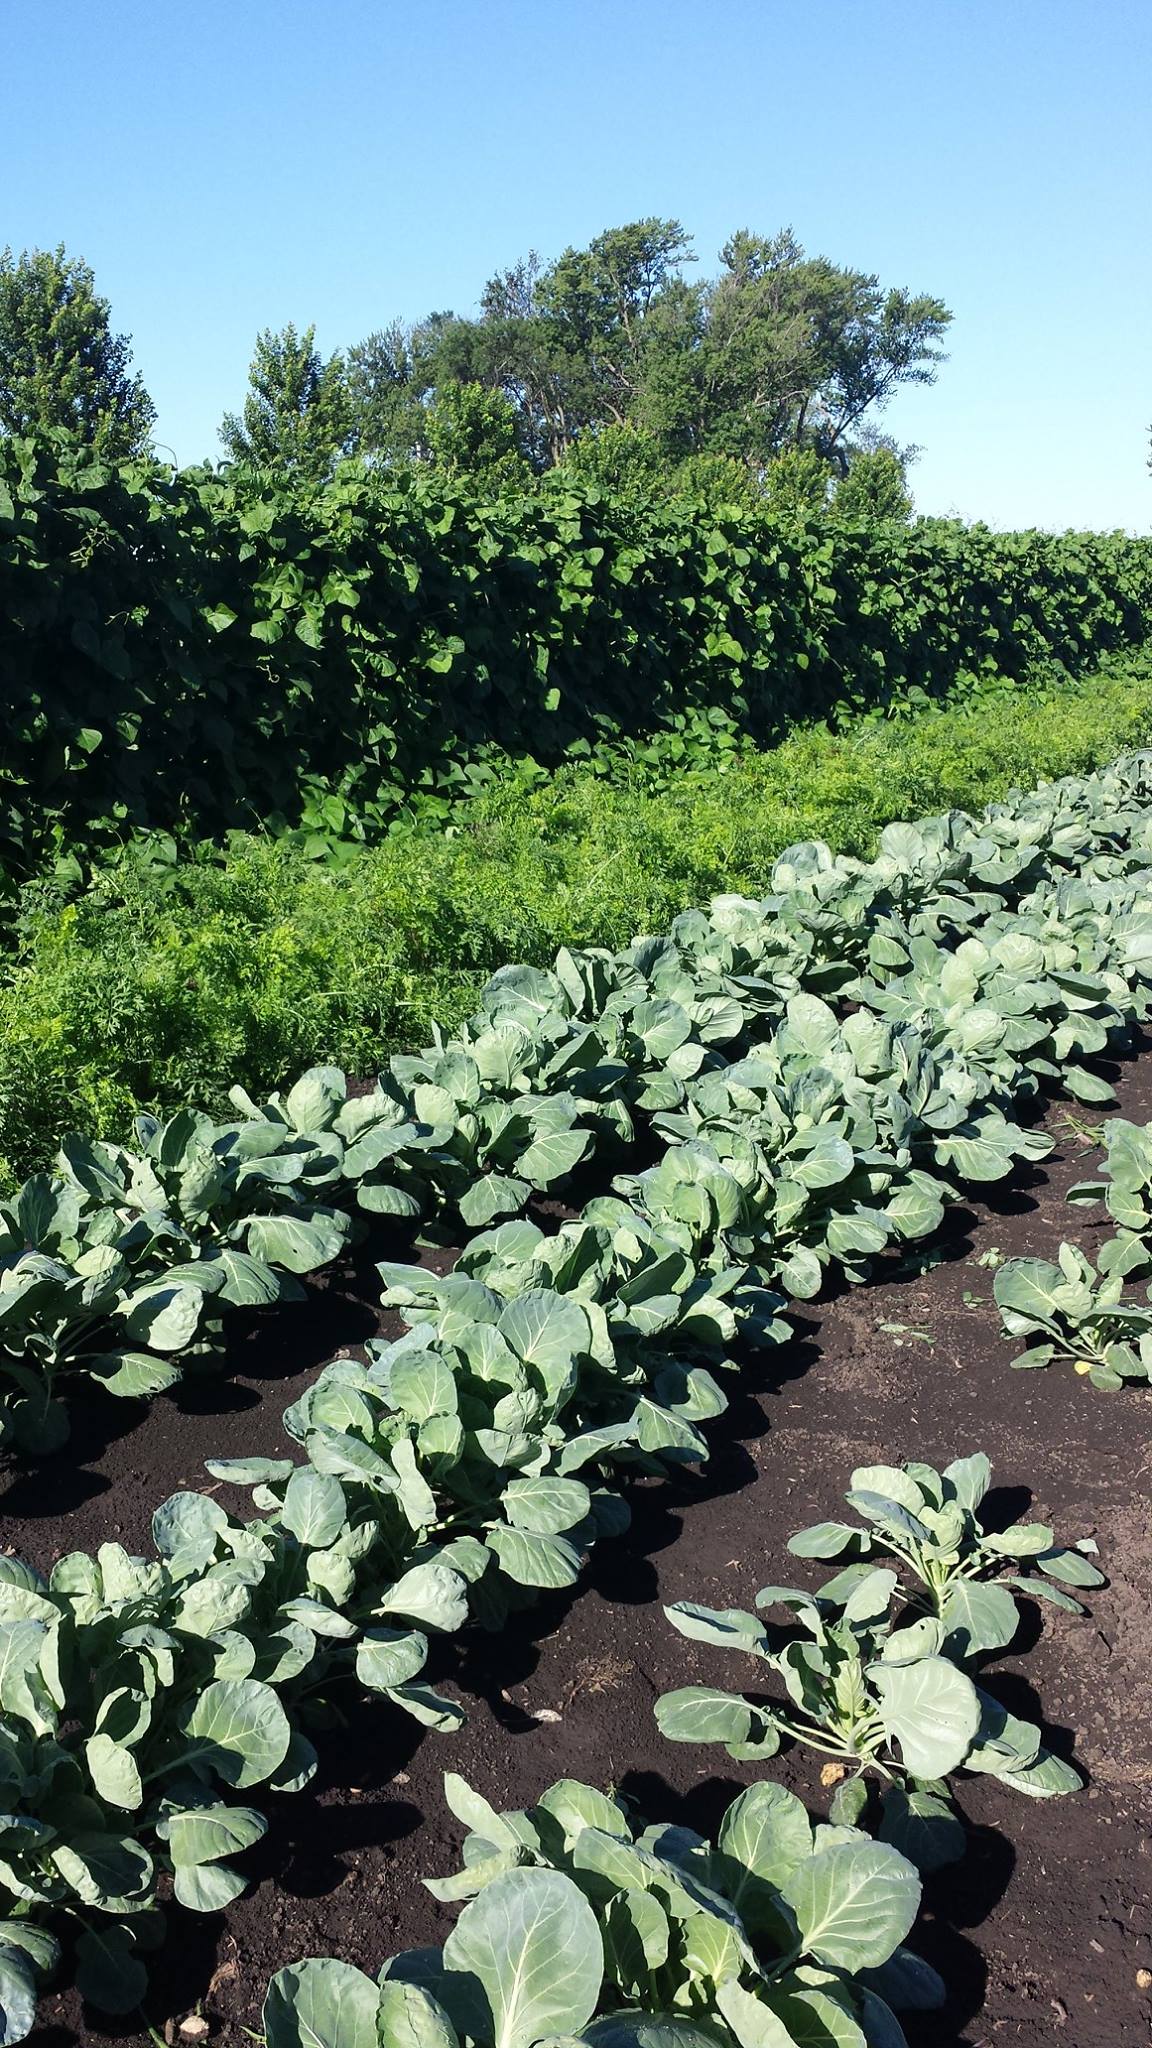 Photo by Lisa Phillips - Blue Skye Farm - Mankato, MN - Green bean wall, purple carrots and Brussels Sprouts